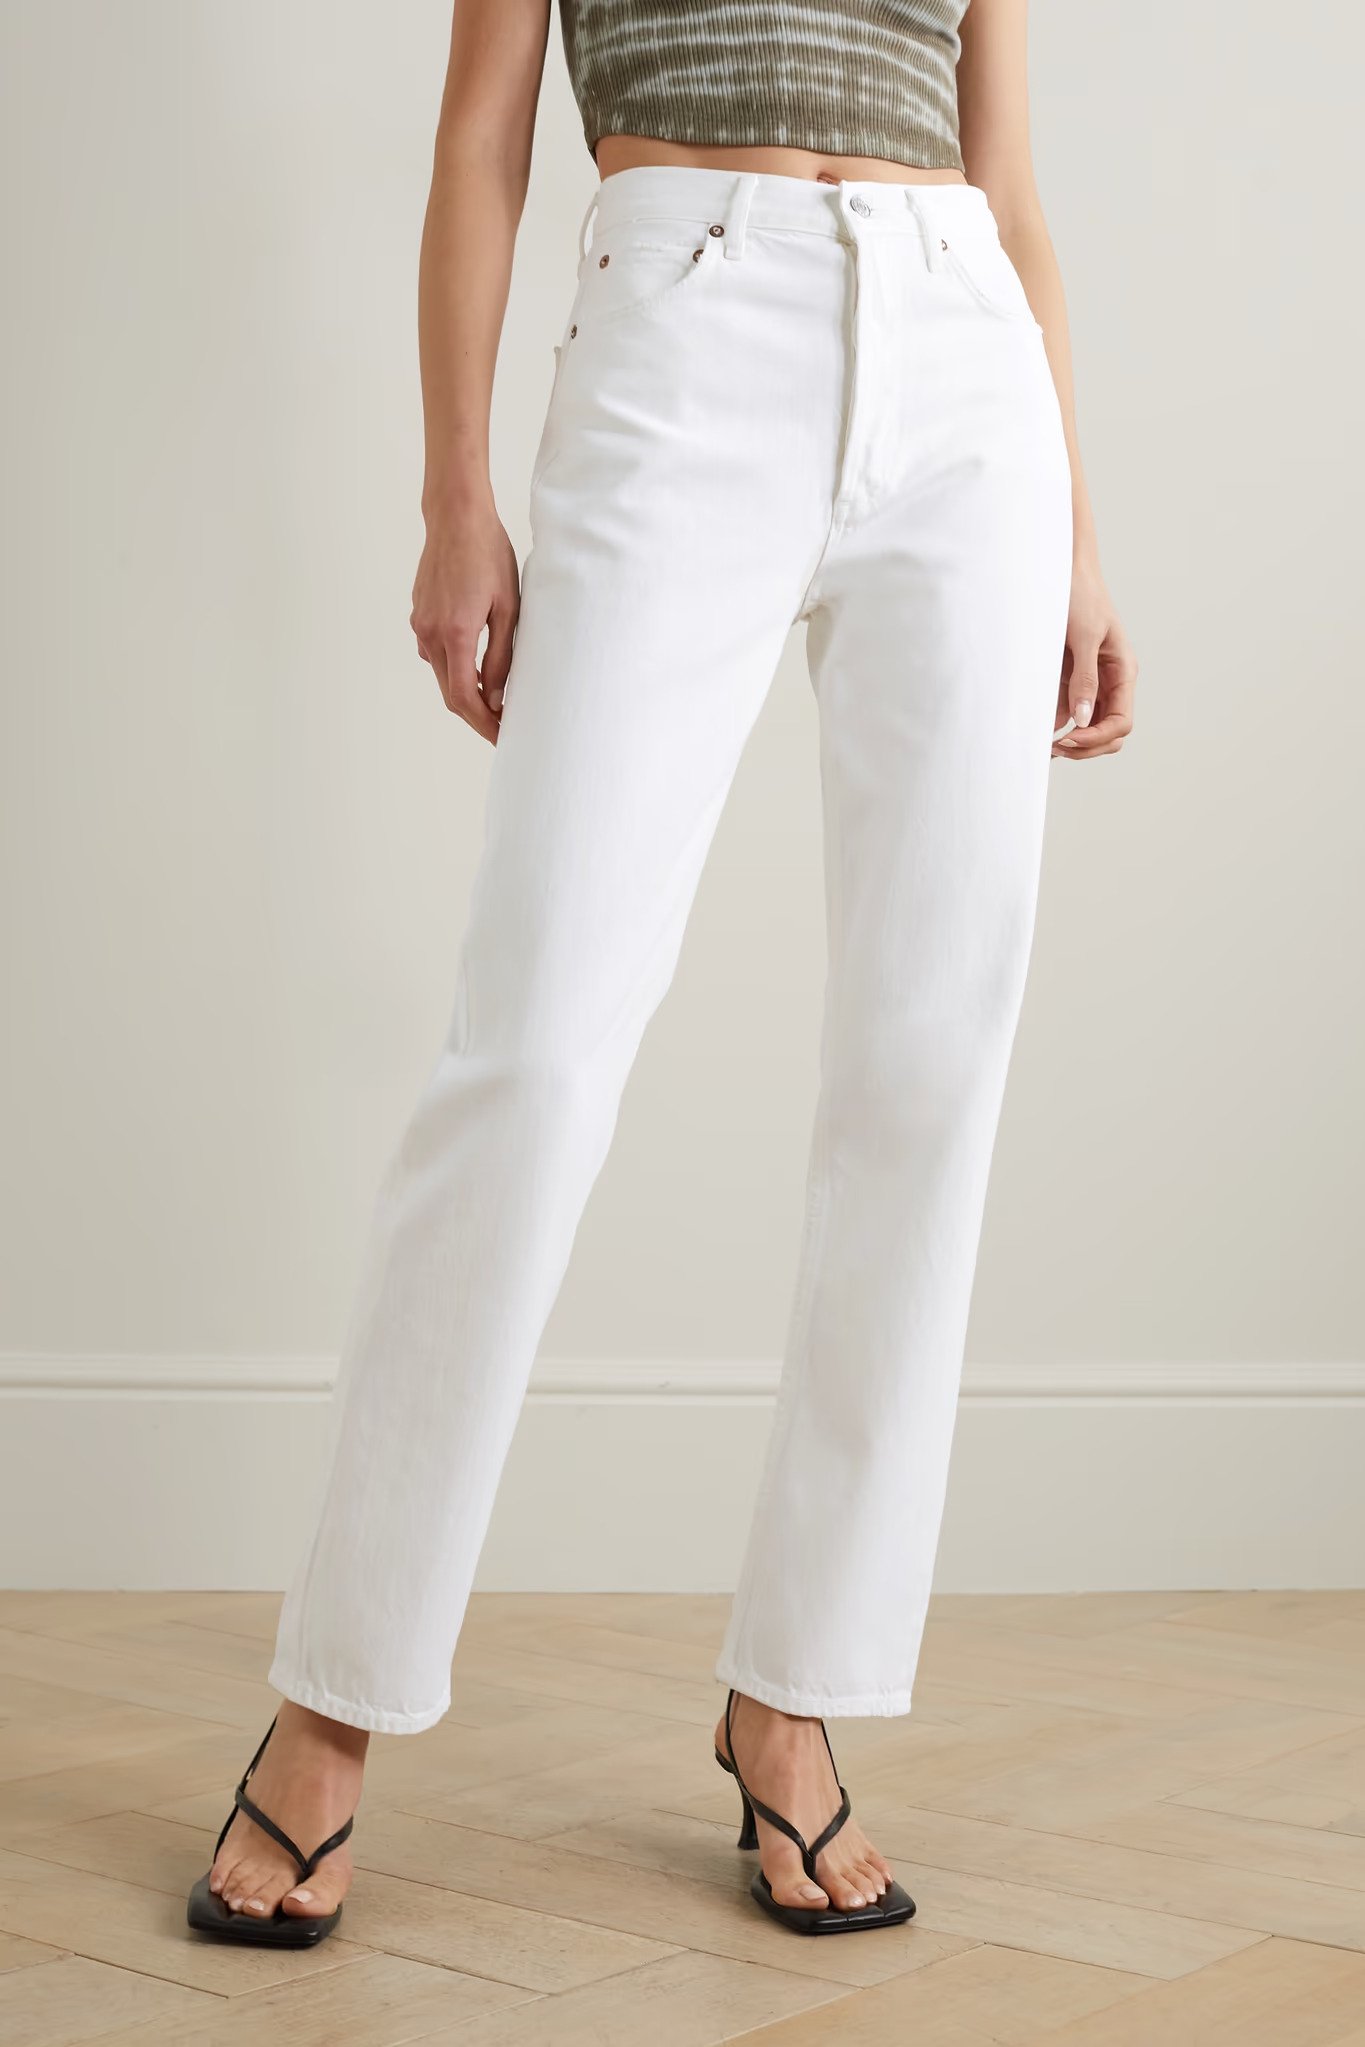 Where to Buy Non-See-Through White Jeans | Who What Wear UK